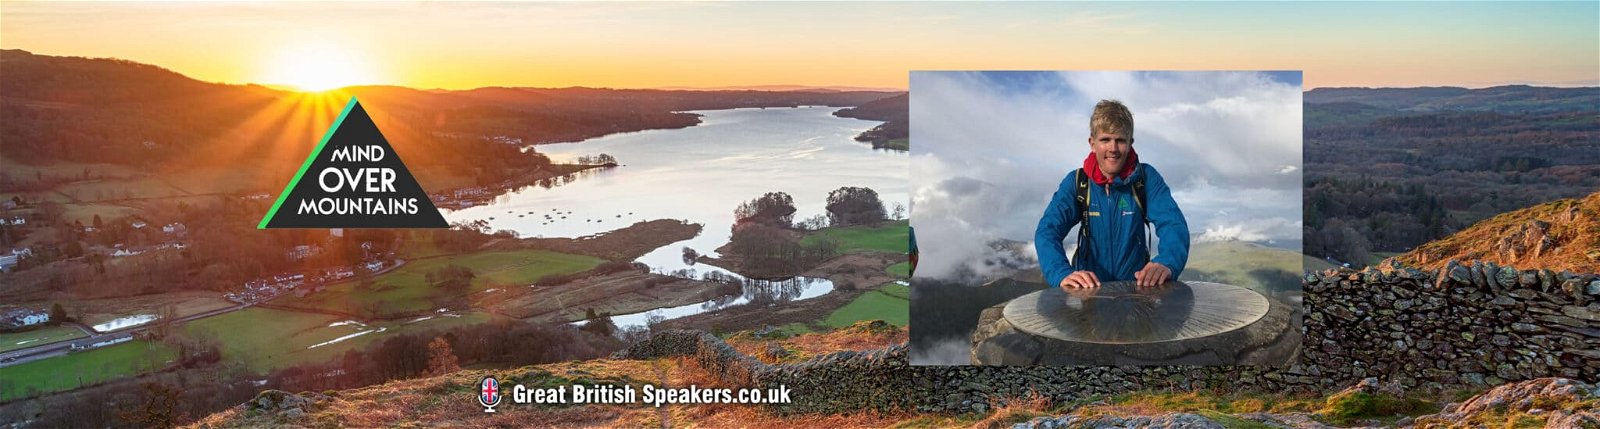 Mind Over Mountains Mental Heath Talks with Alex Staniforth at Great British Speakers